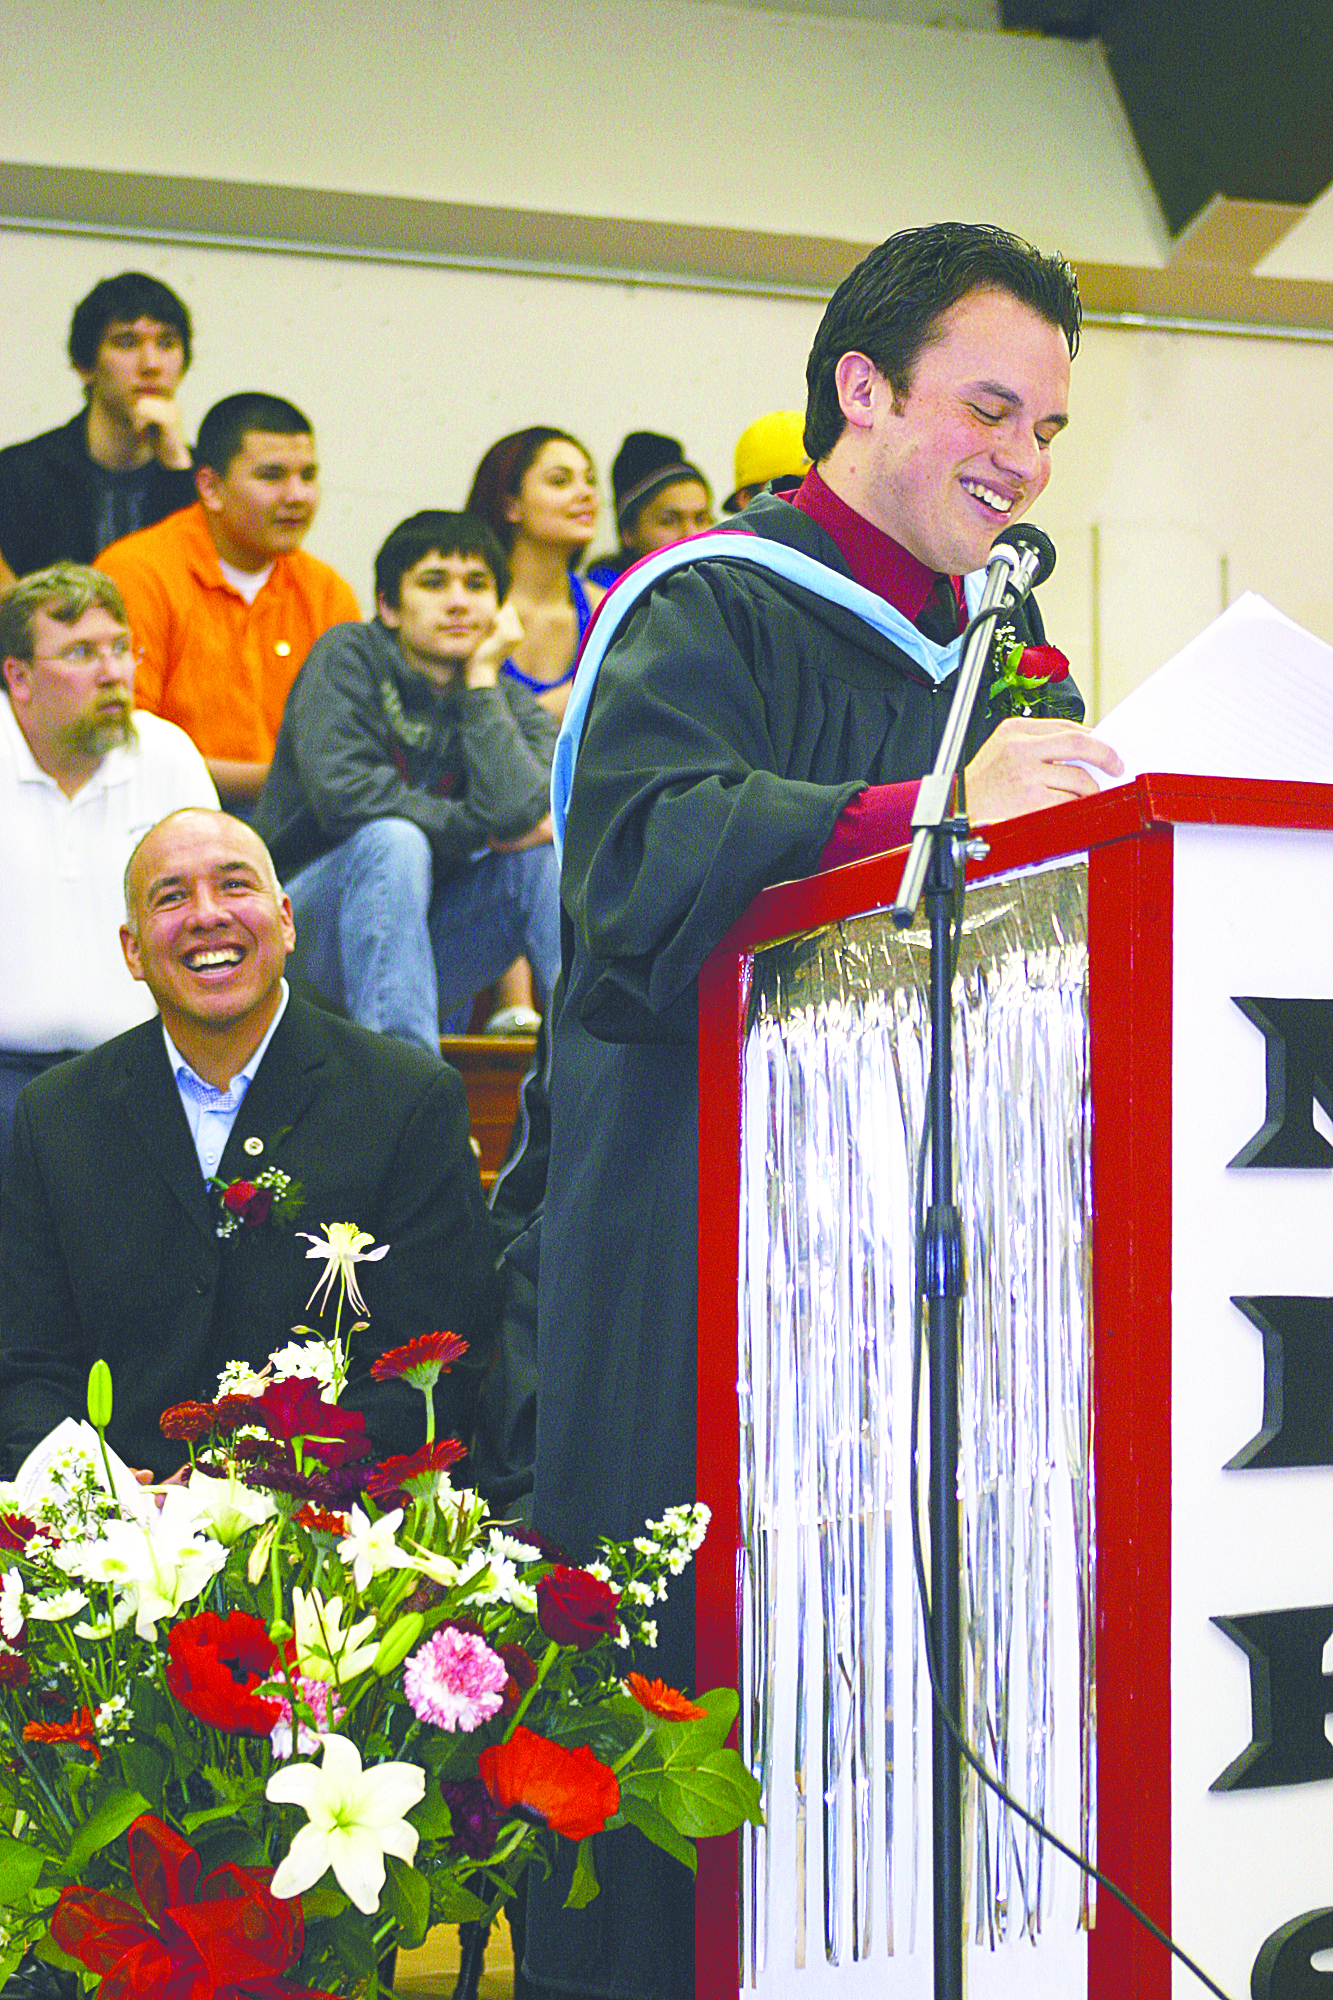 Commencement speaker Wilson Arnold praises the tenacity of his Neah Bay High School graduates during the June 2 ceremonies. Makah Tribal Council Vice Chairman Michael Lawrence is seated at left.  -- Photo by Diane Urbani de la Paz/Peninsula Profile